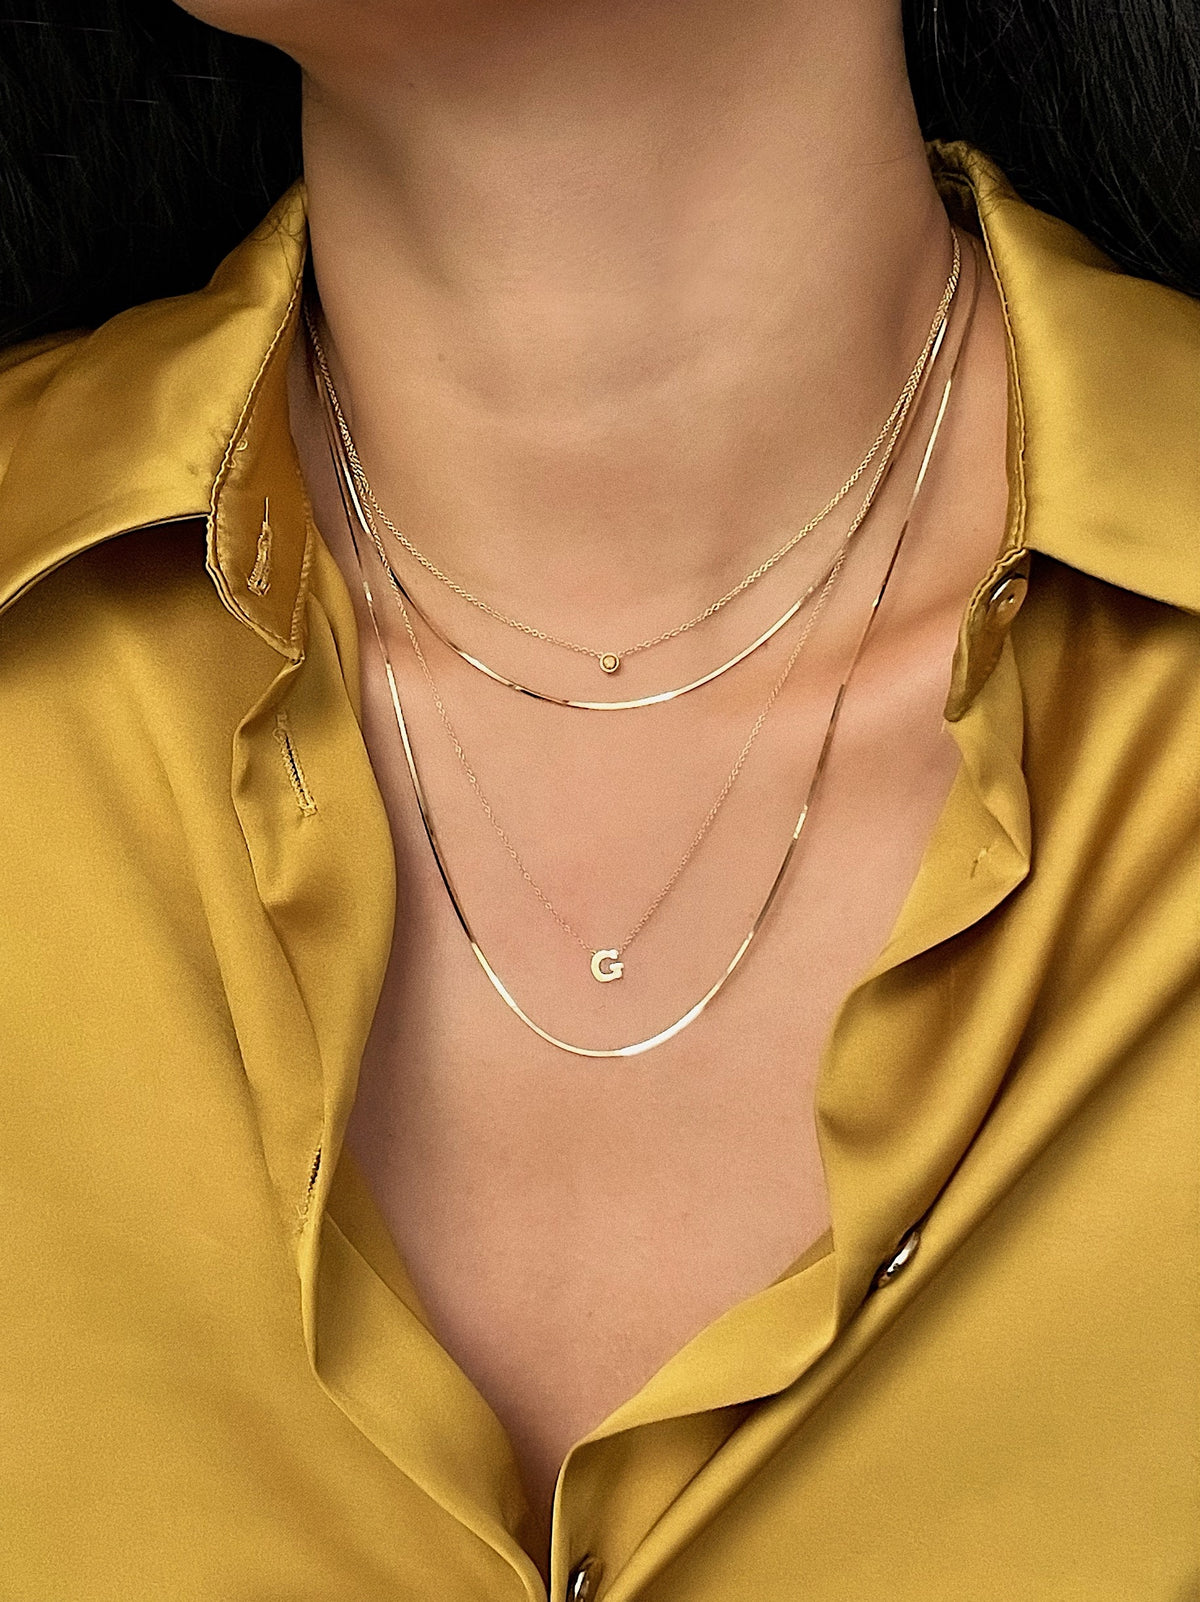 14K Gold Necklace Layered Look